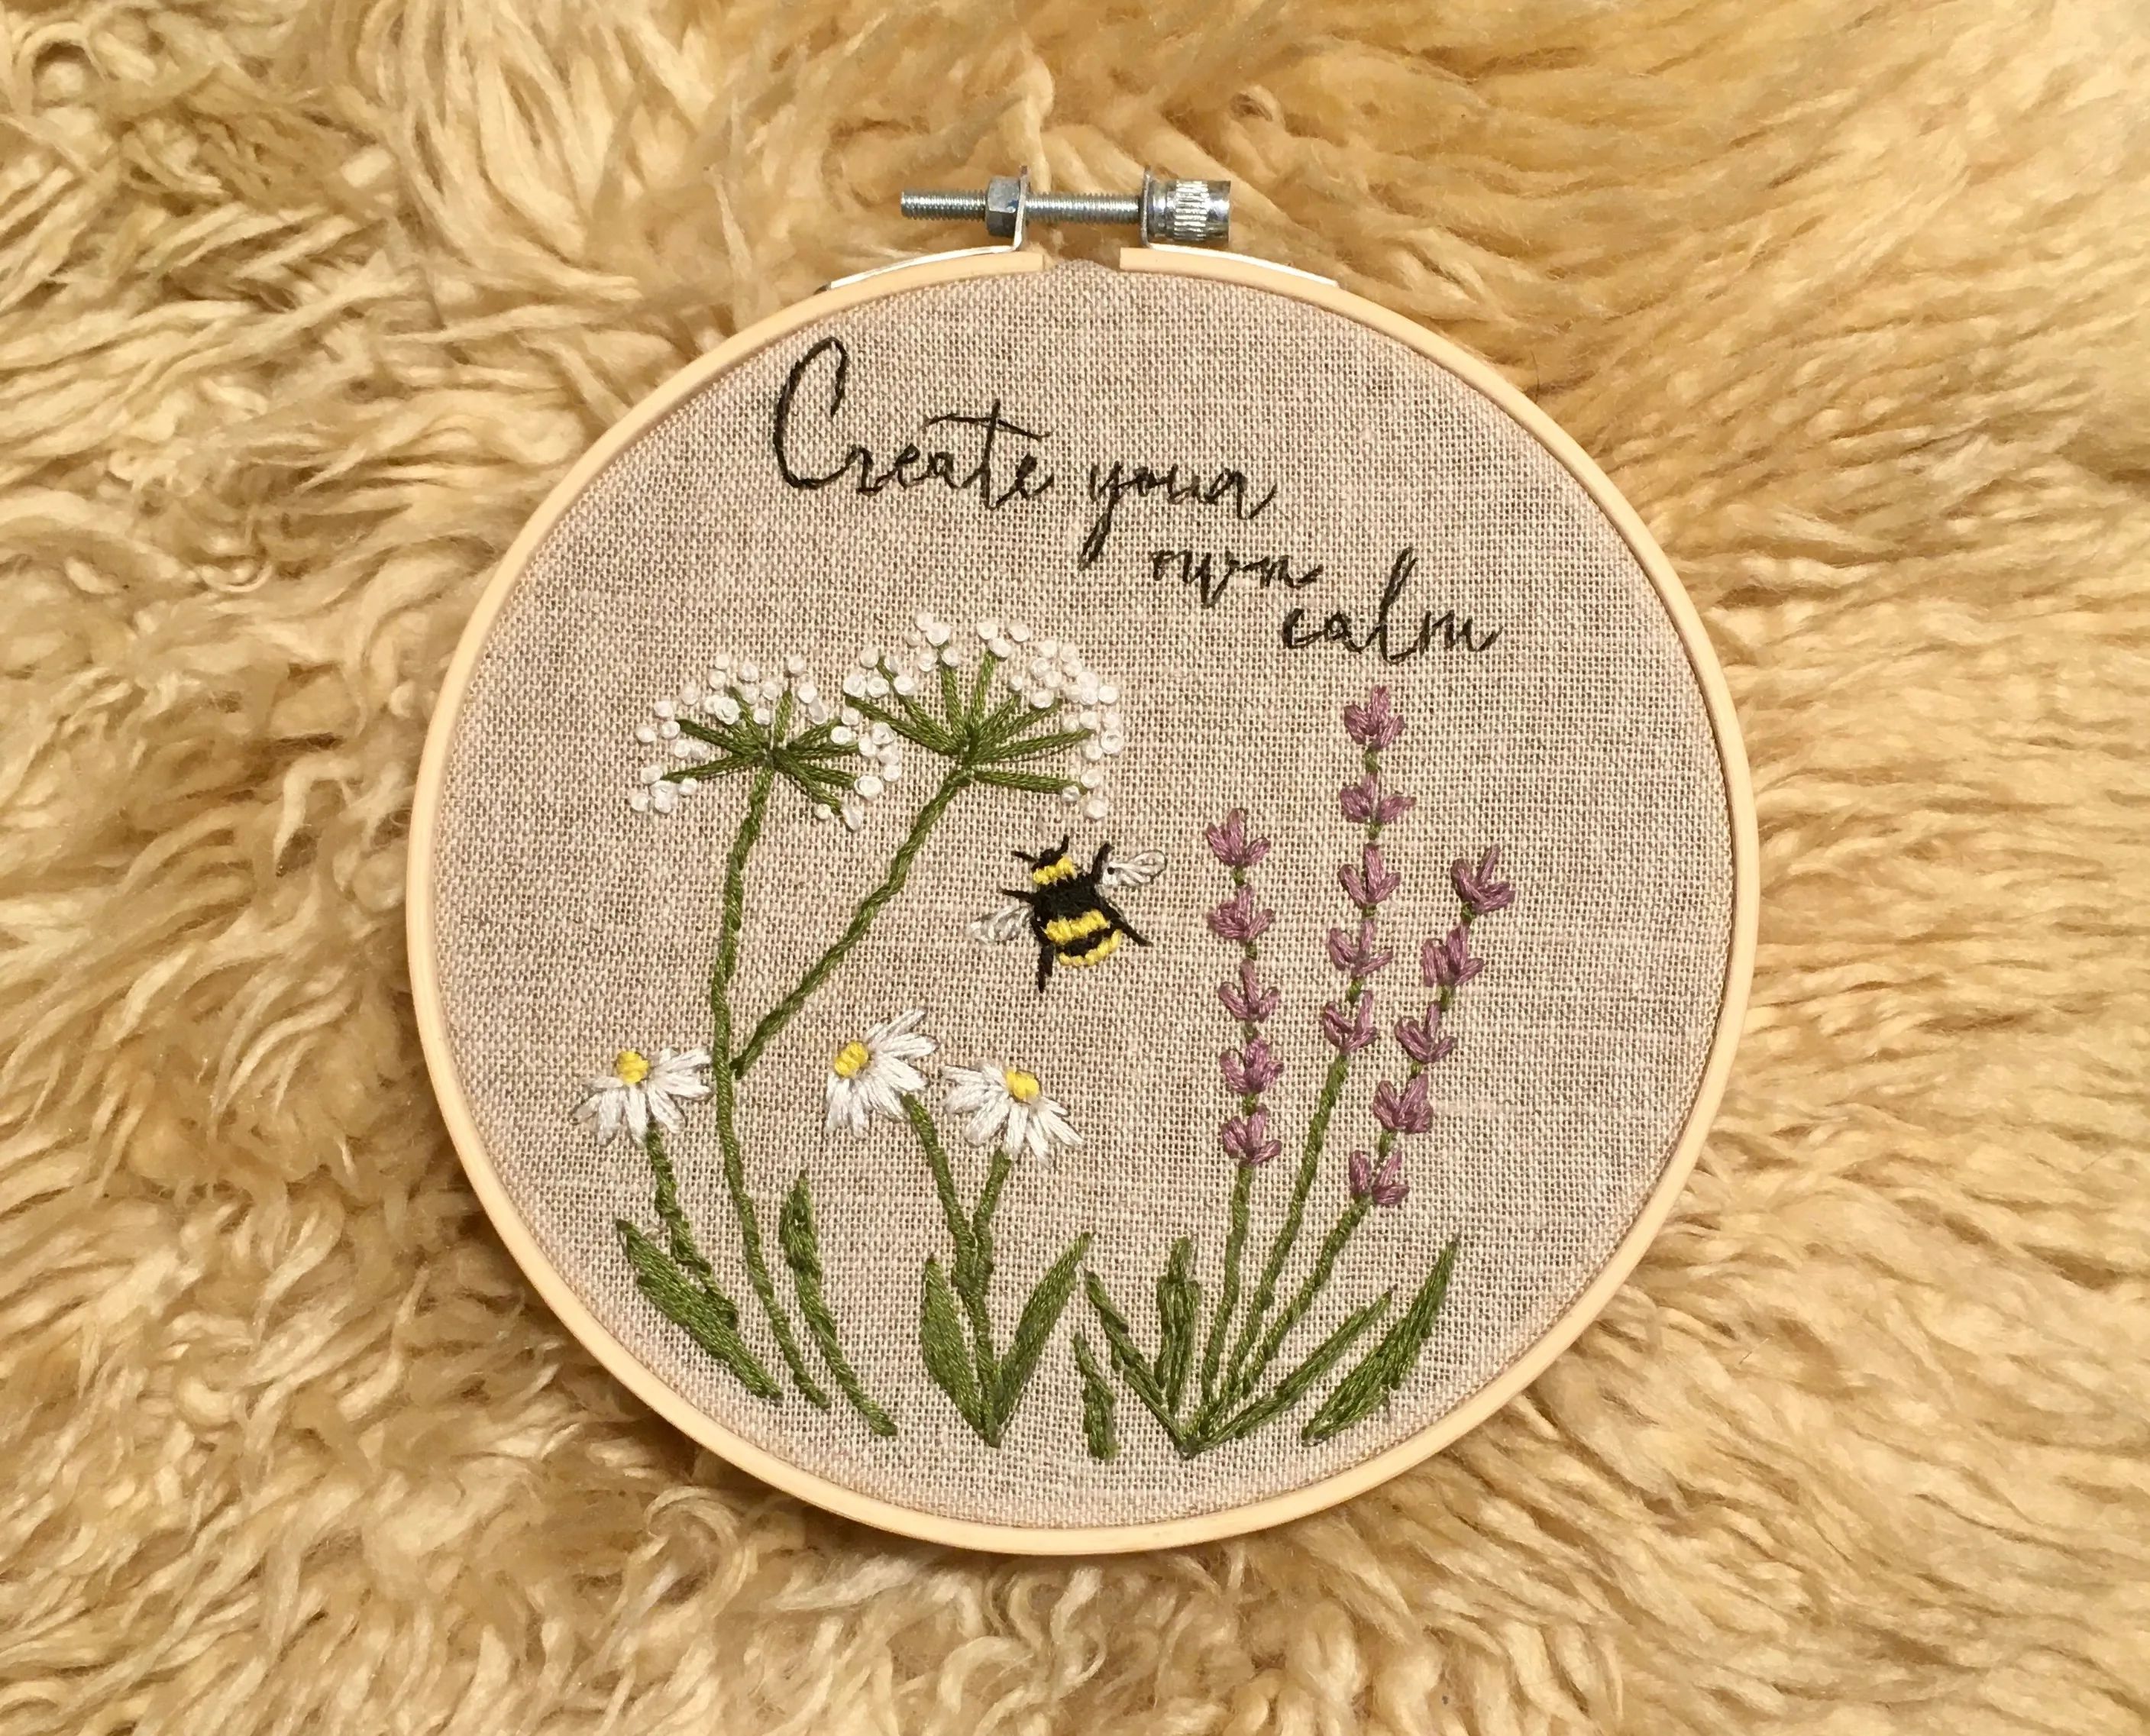 cross-stitch pattern of a garden with the text 'create your own calm'